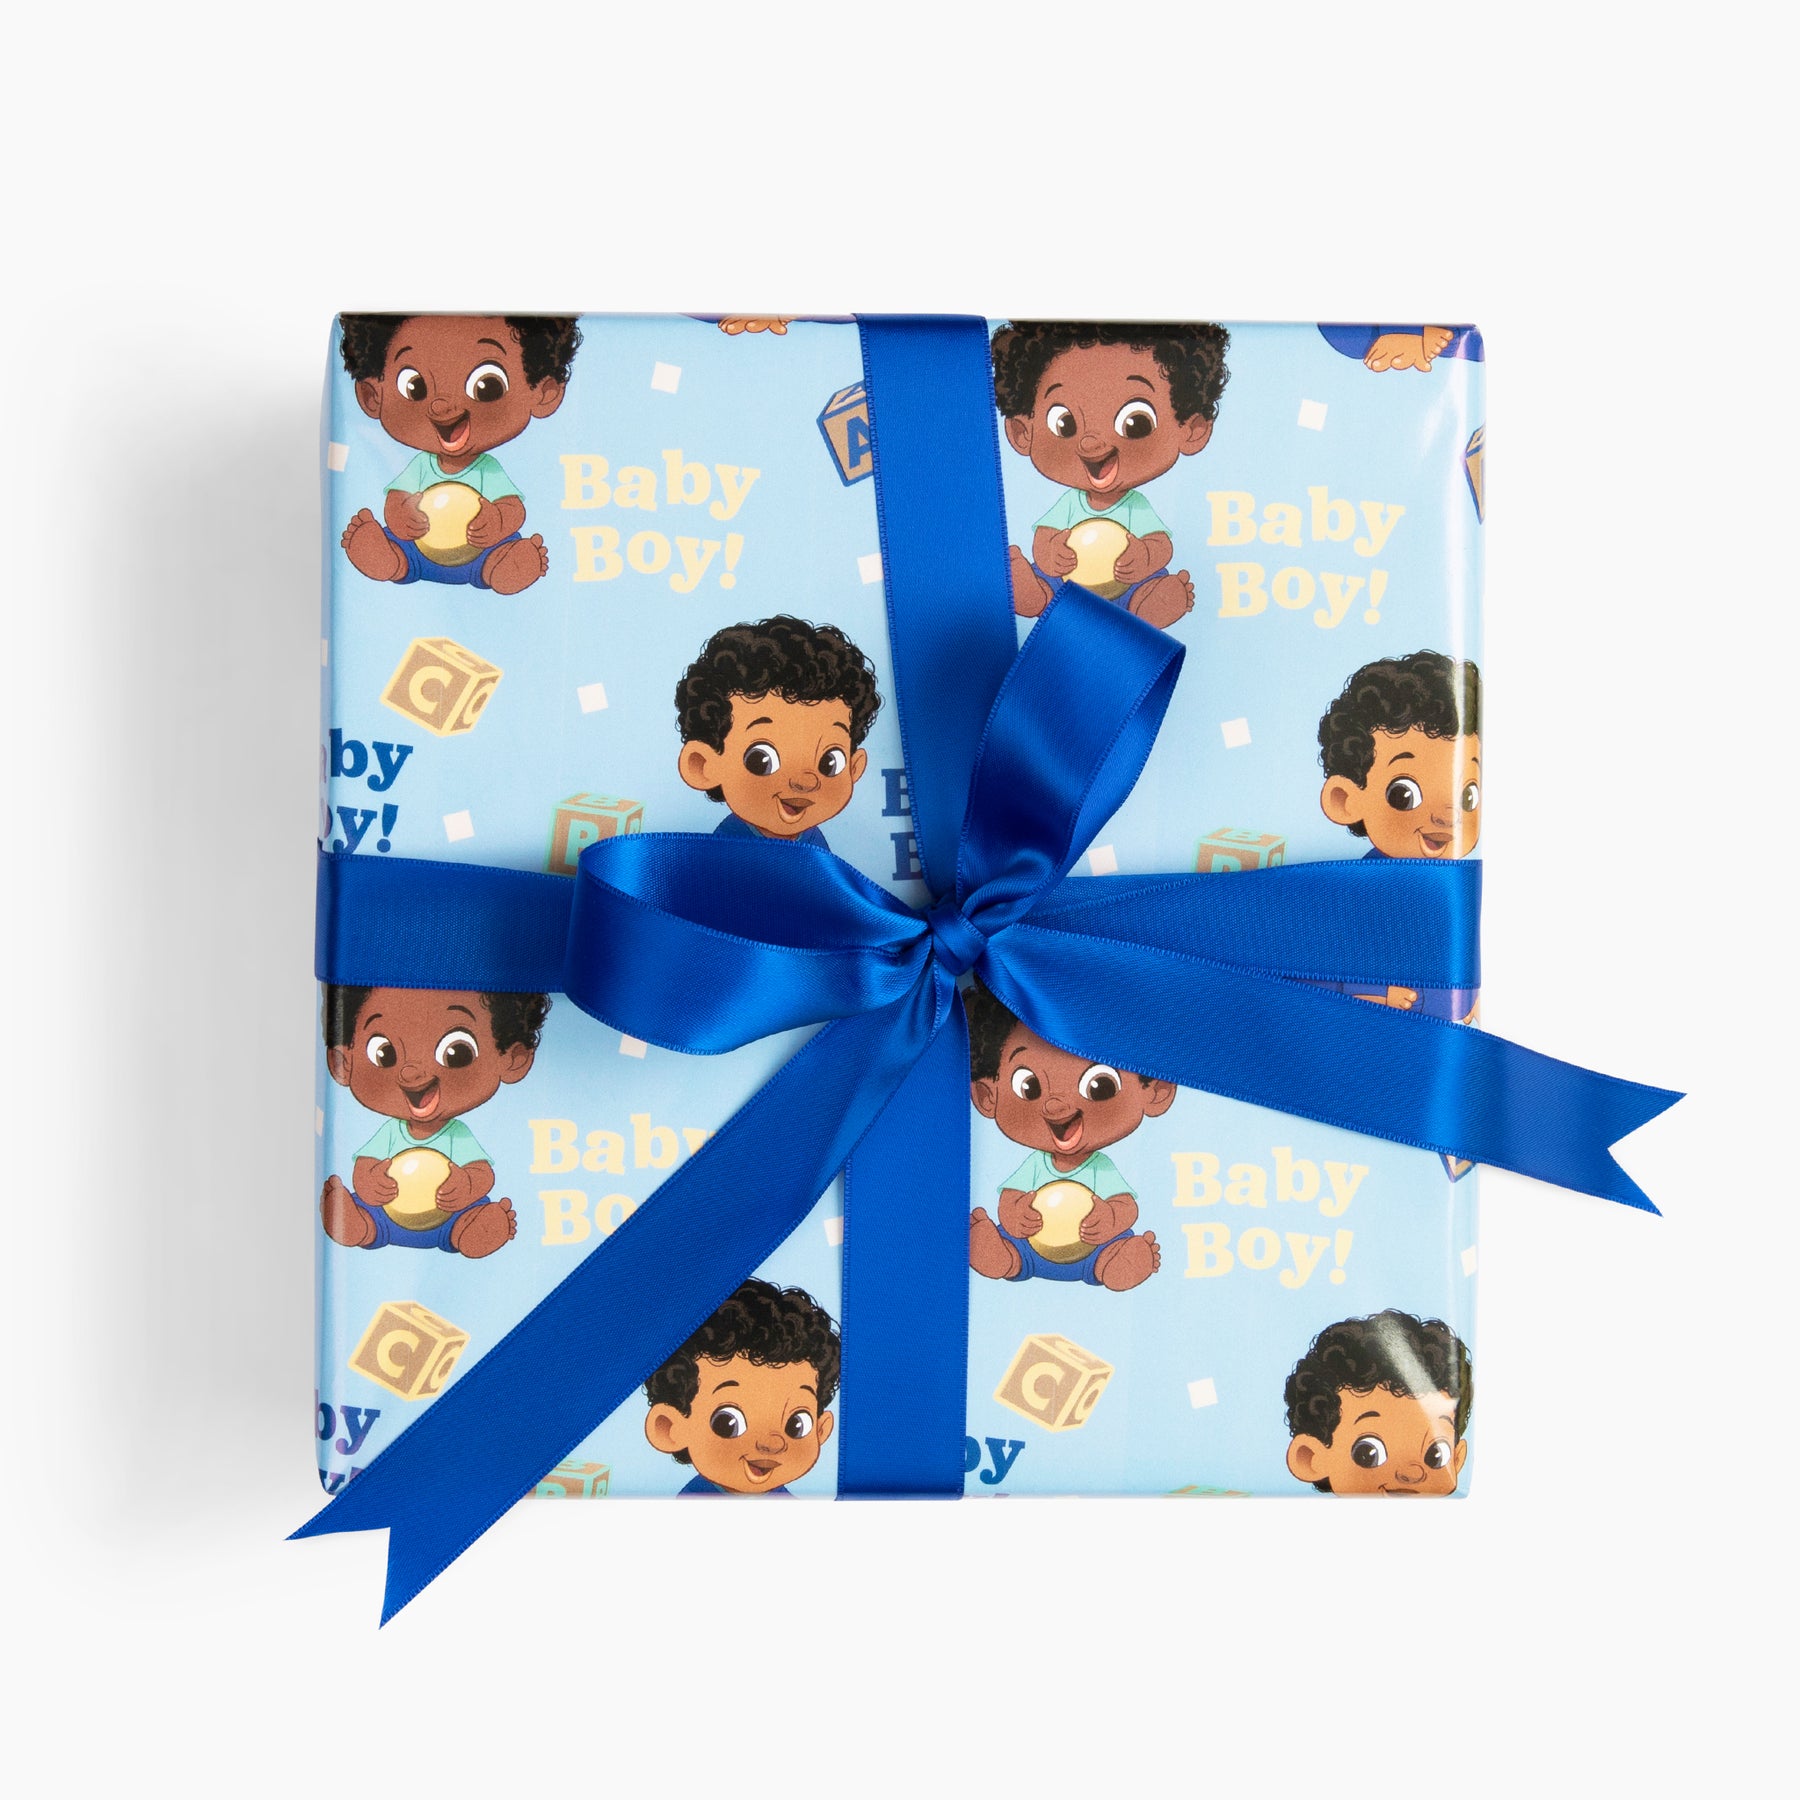 Personalised New Baby Boy Wrapping Paper/gift Wrap Welcome to the World  Sheets or Rolls Neutral, Nephew Friend Grandson Green 